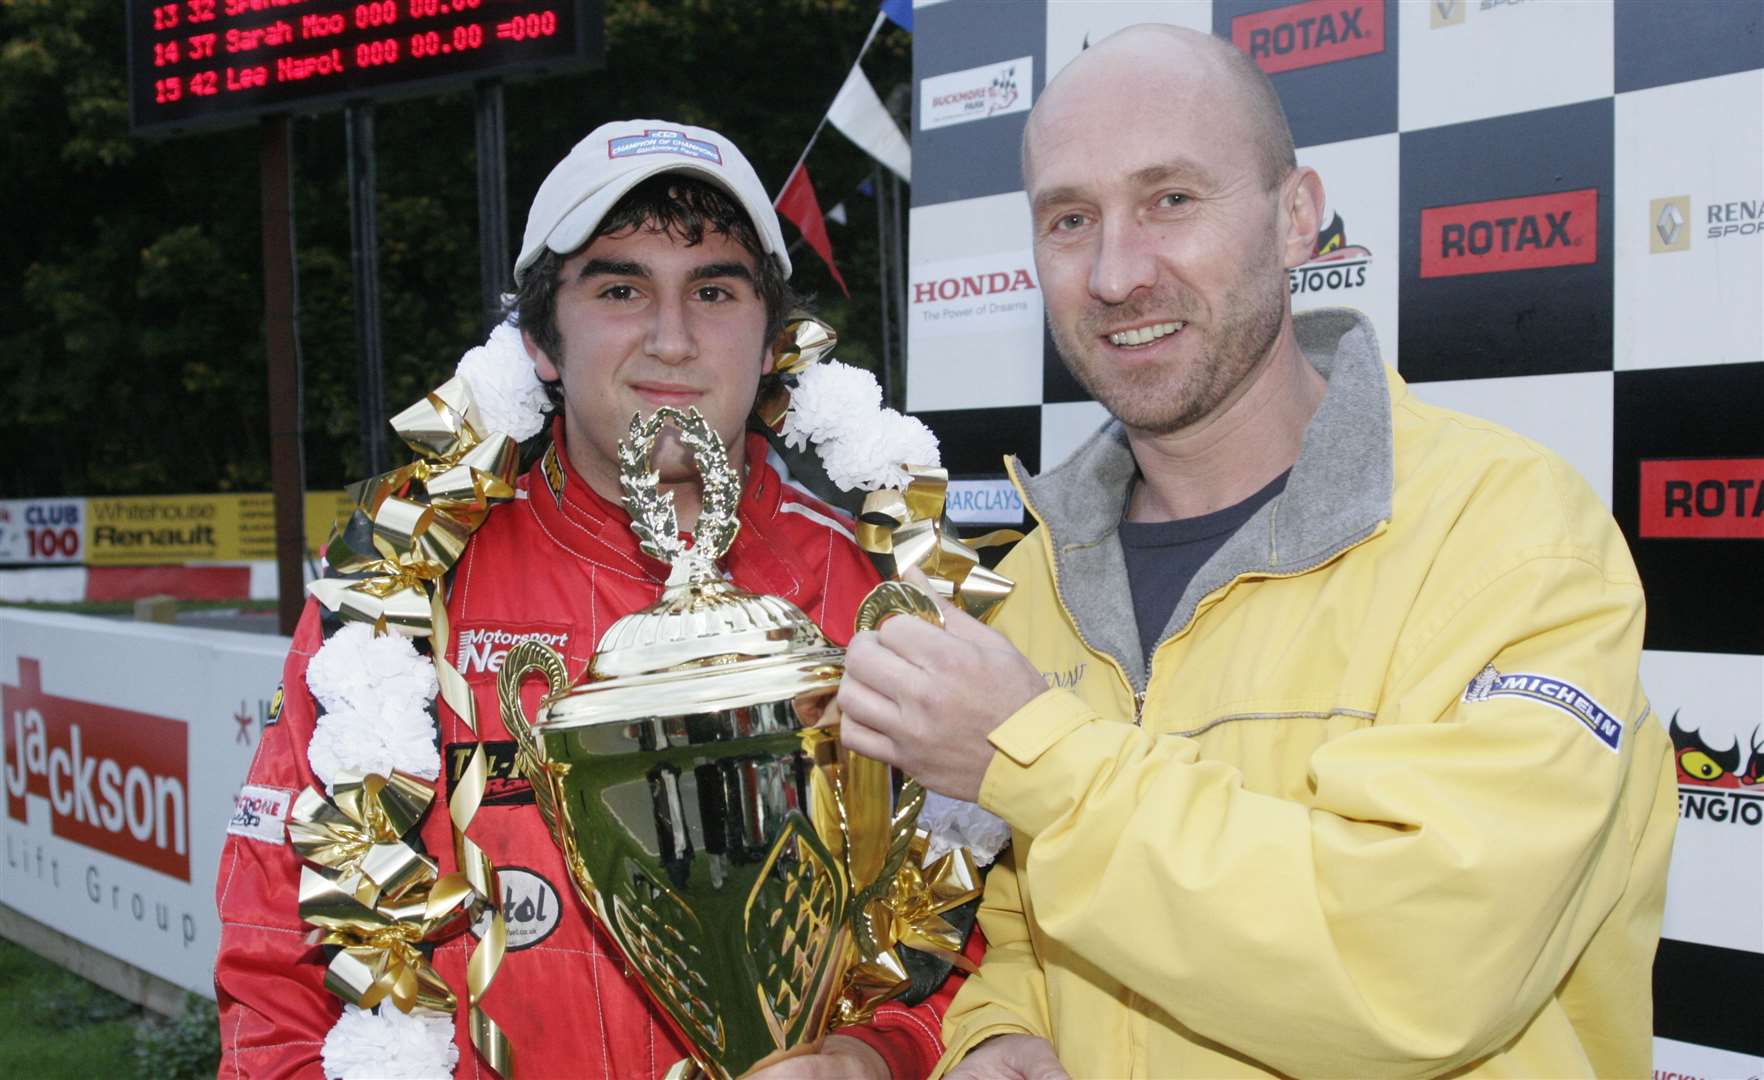 Malvern – whose younger brother Jon is Lando Norris's trainer – was presented with the Champion of Champions trophy in October 2005 by Perry McCarthy, Top Gear's original Stig. Picture: Peter Still